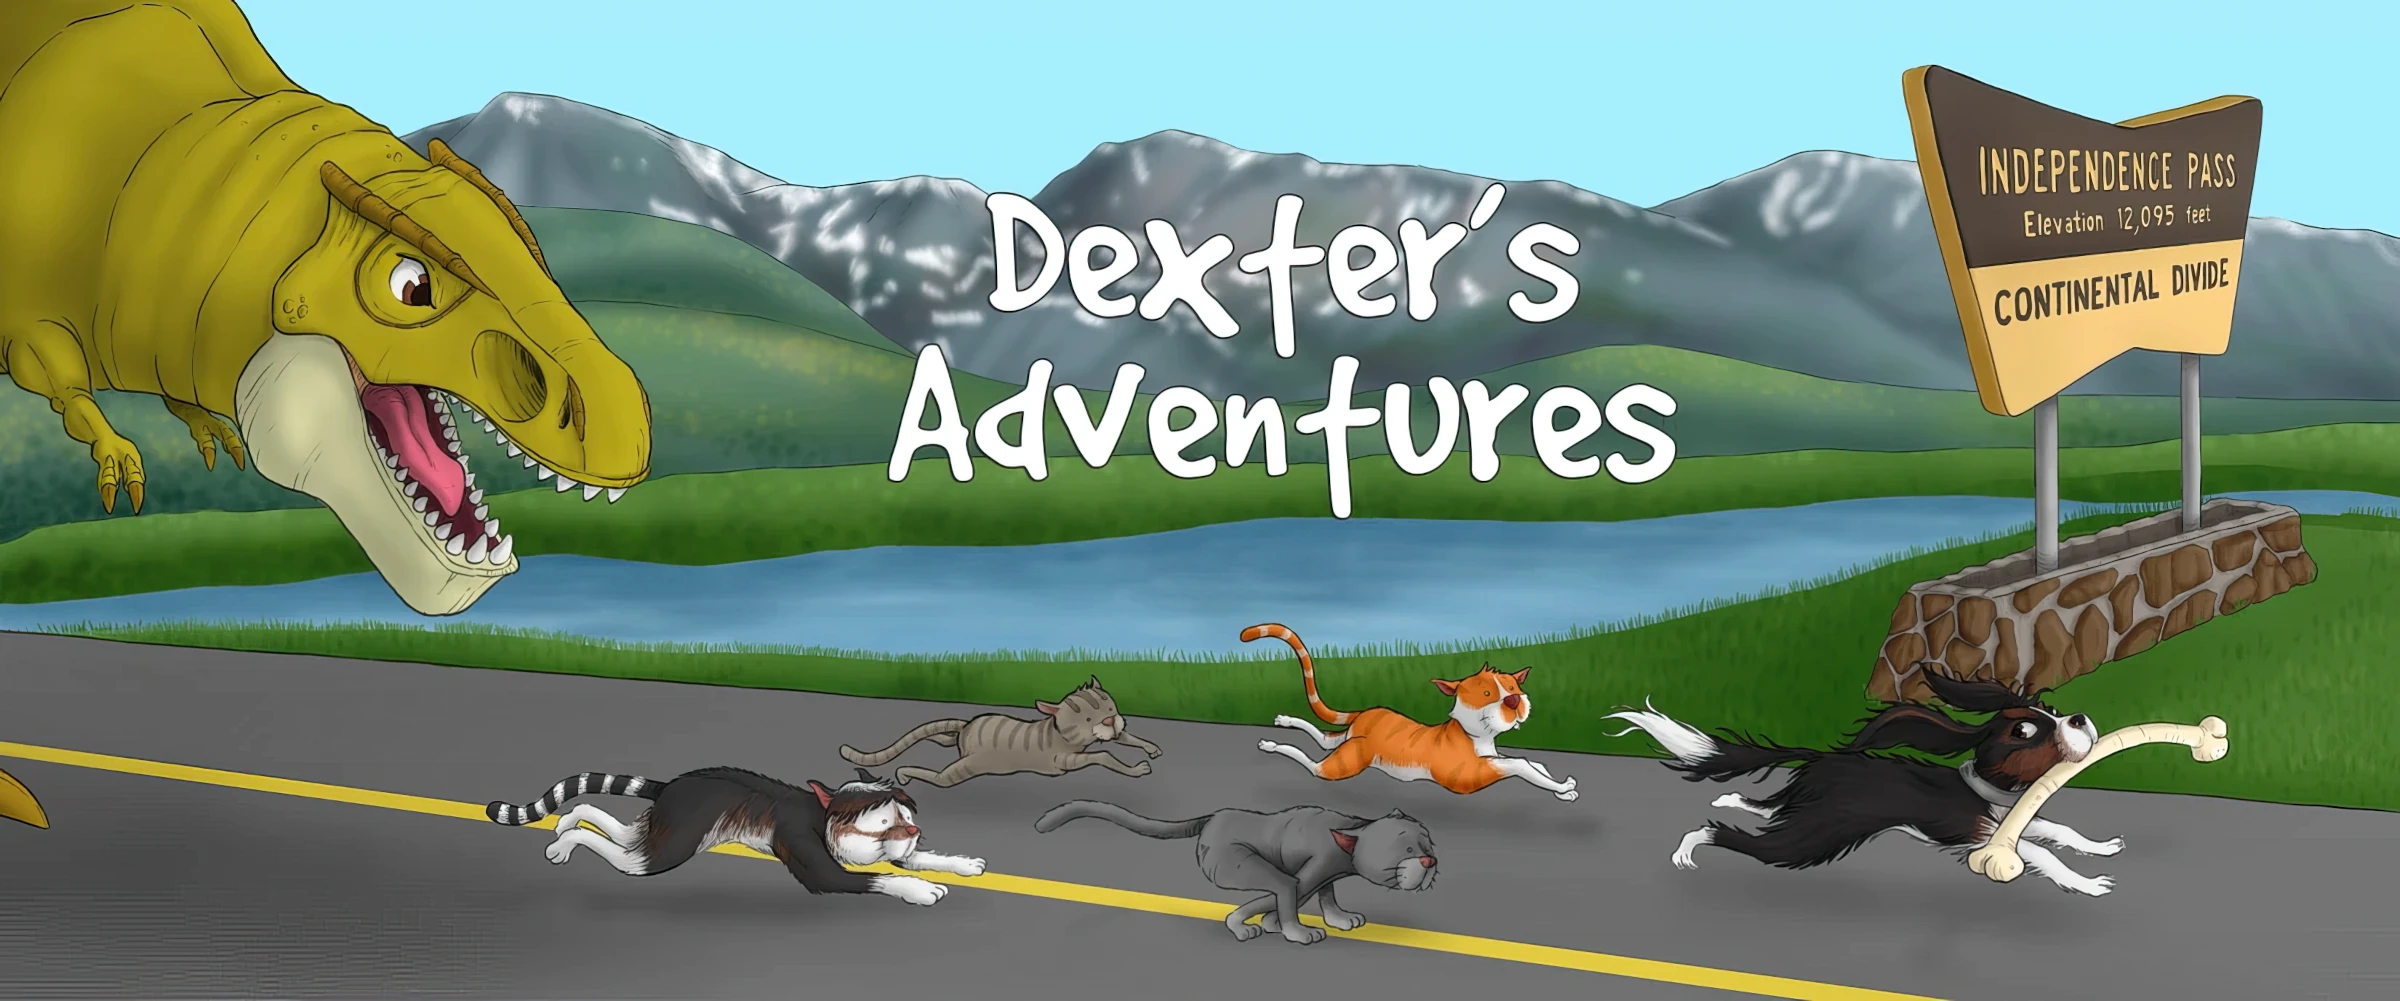 Dexter's Adventures -- Fossil Fuels in the Classroom: The ABCs of Fossil Fuels